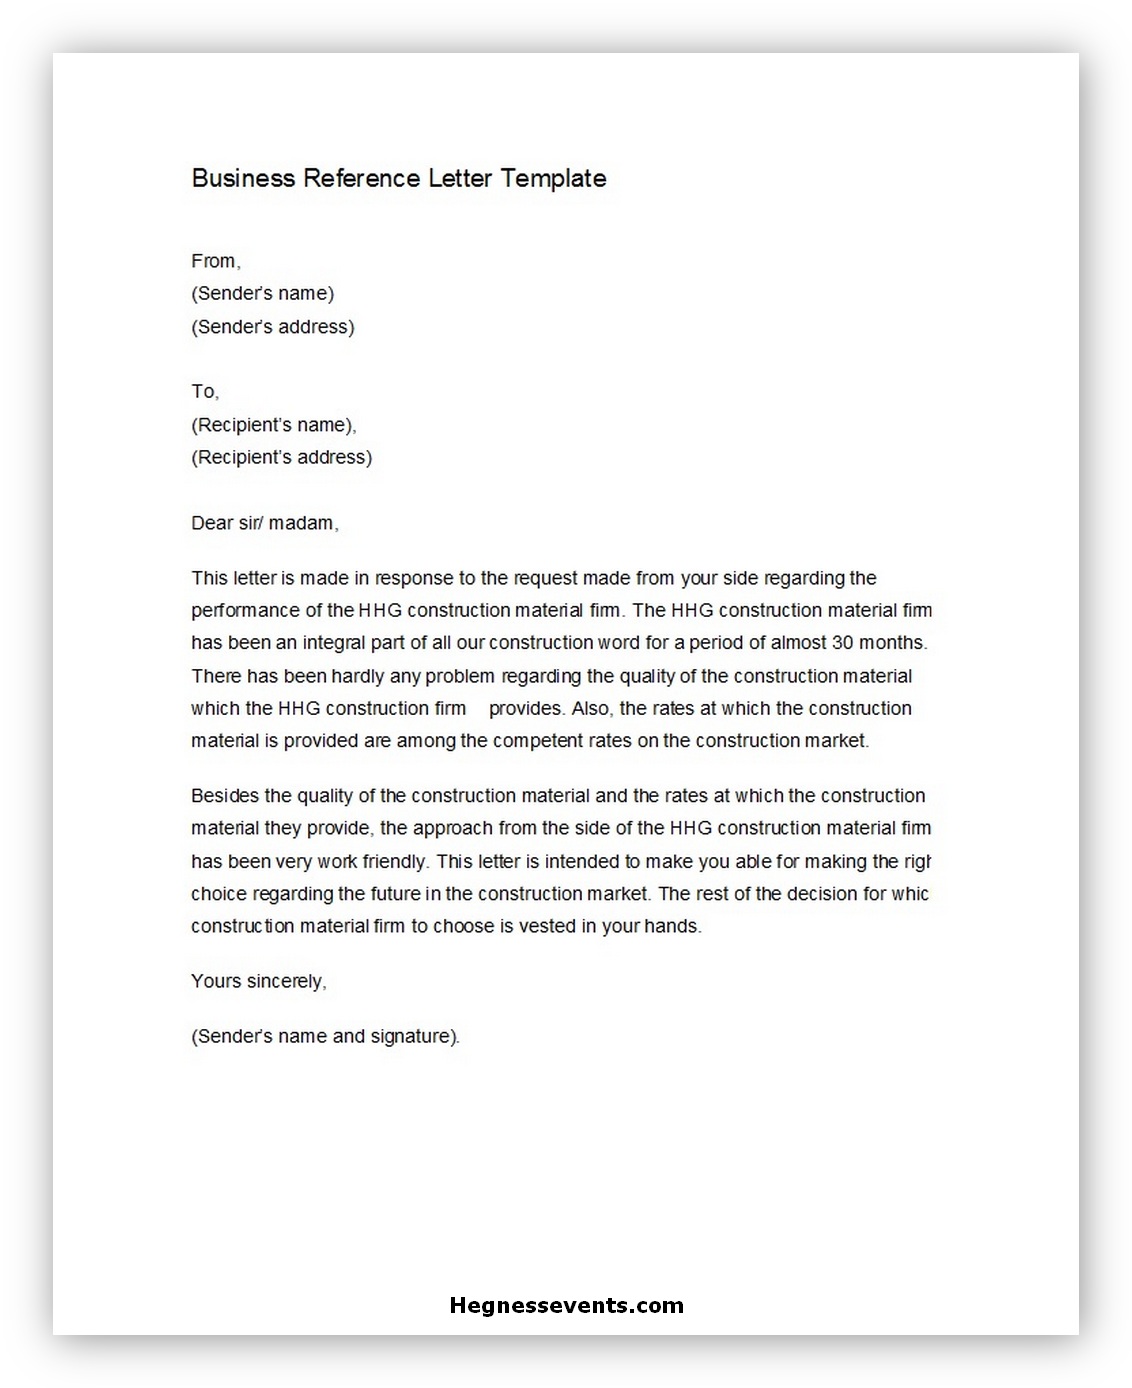 Business reference letter 02